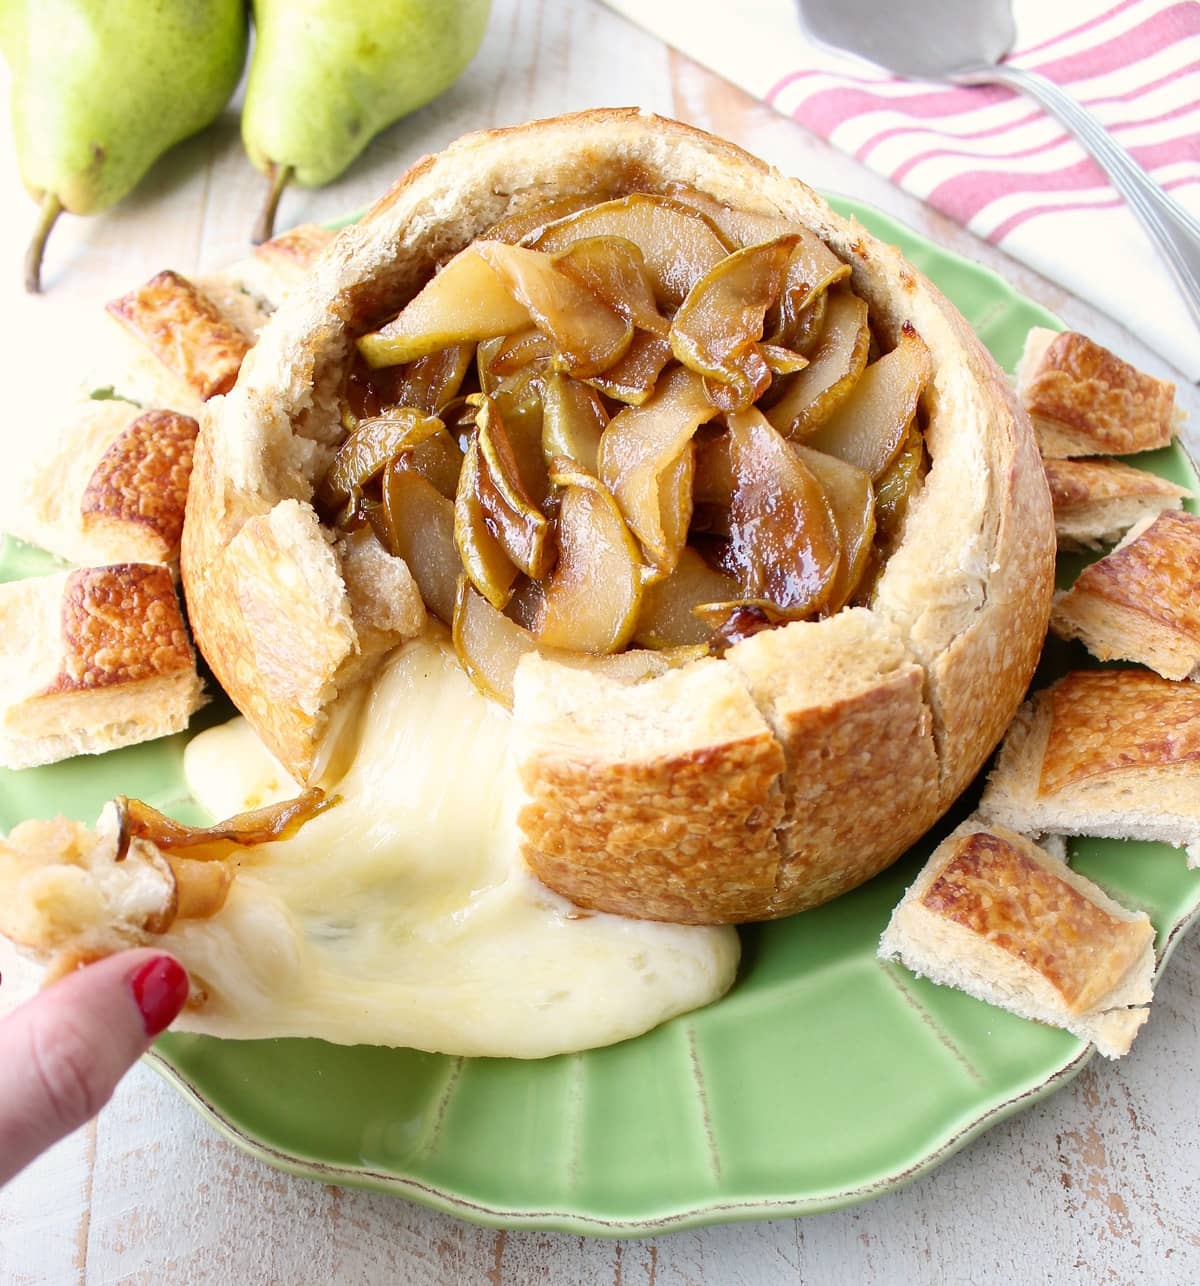 Brie cheese being pulled from a baked brie bread bowl with caramelized pears